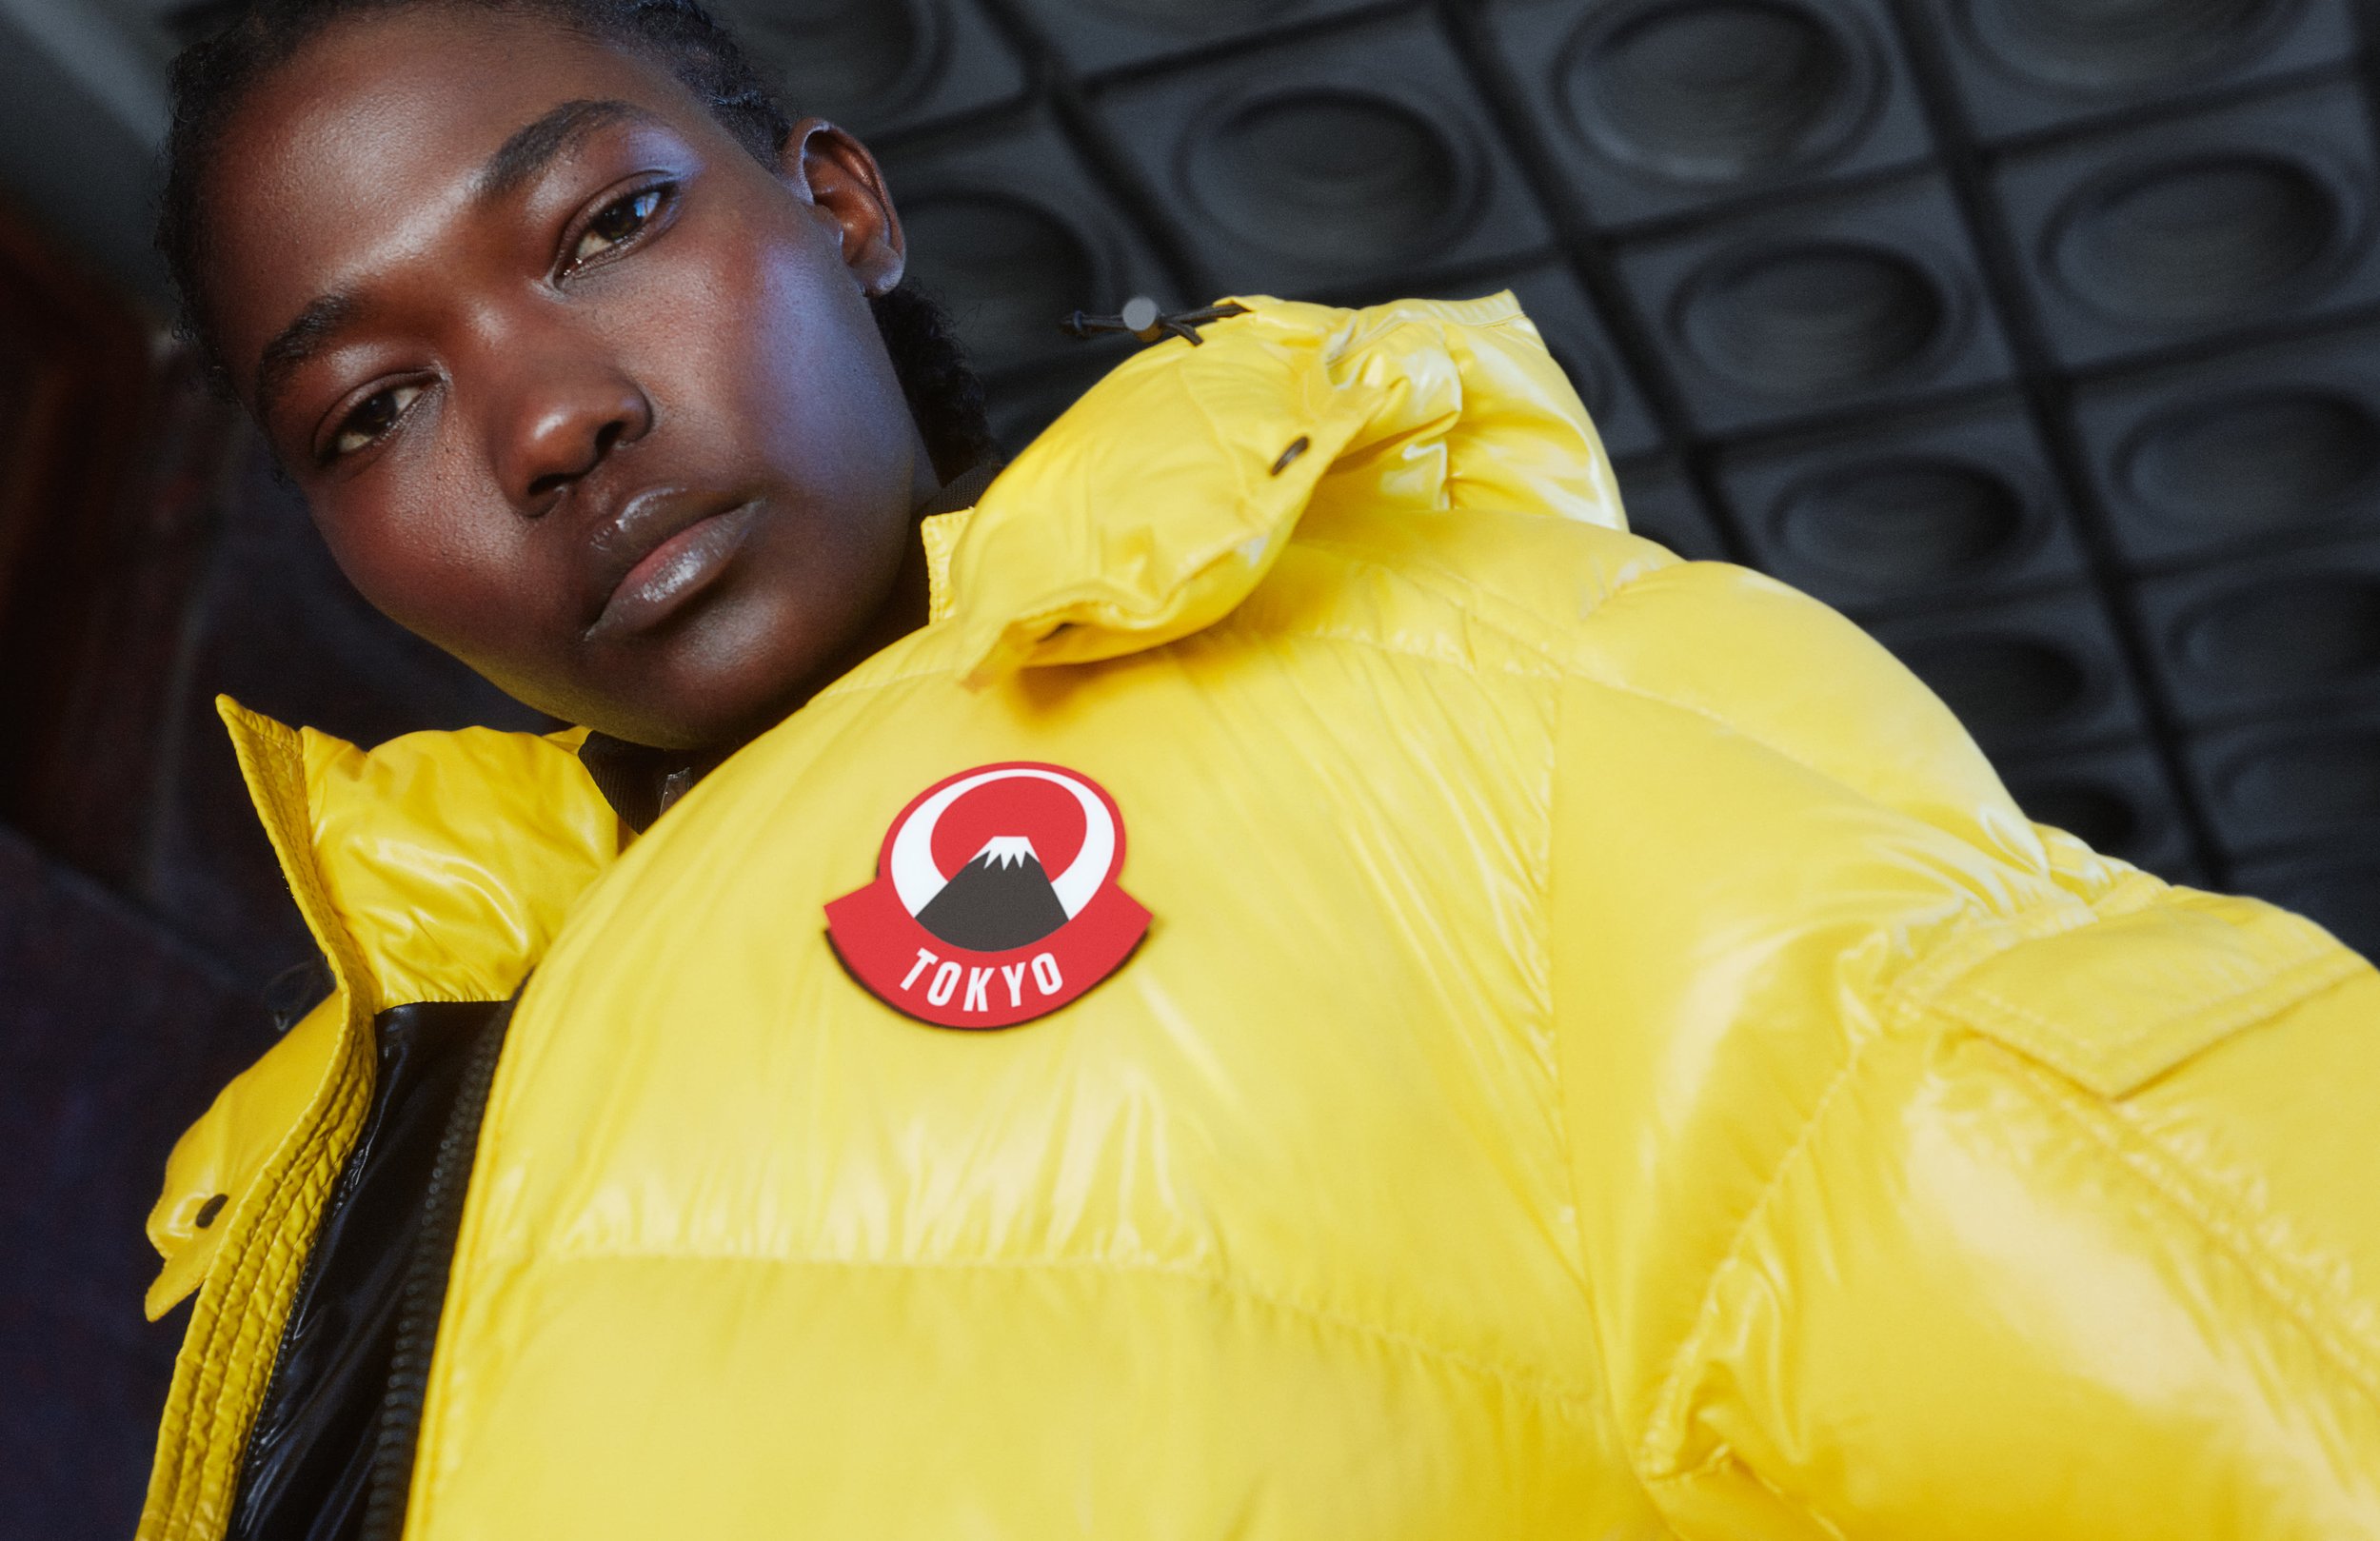 MONCLER HOUSE OF GENIUS 2021_EDITORIAL IMAGES_2.jpg